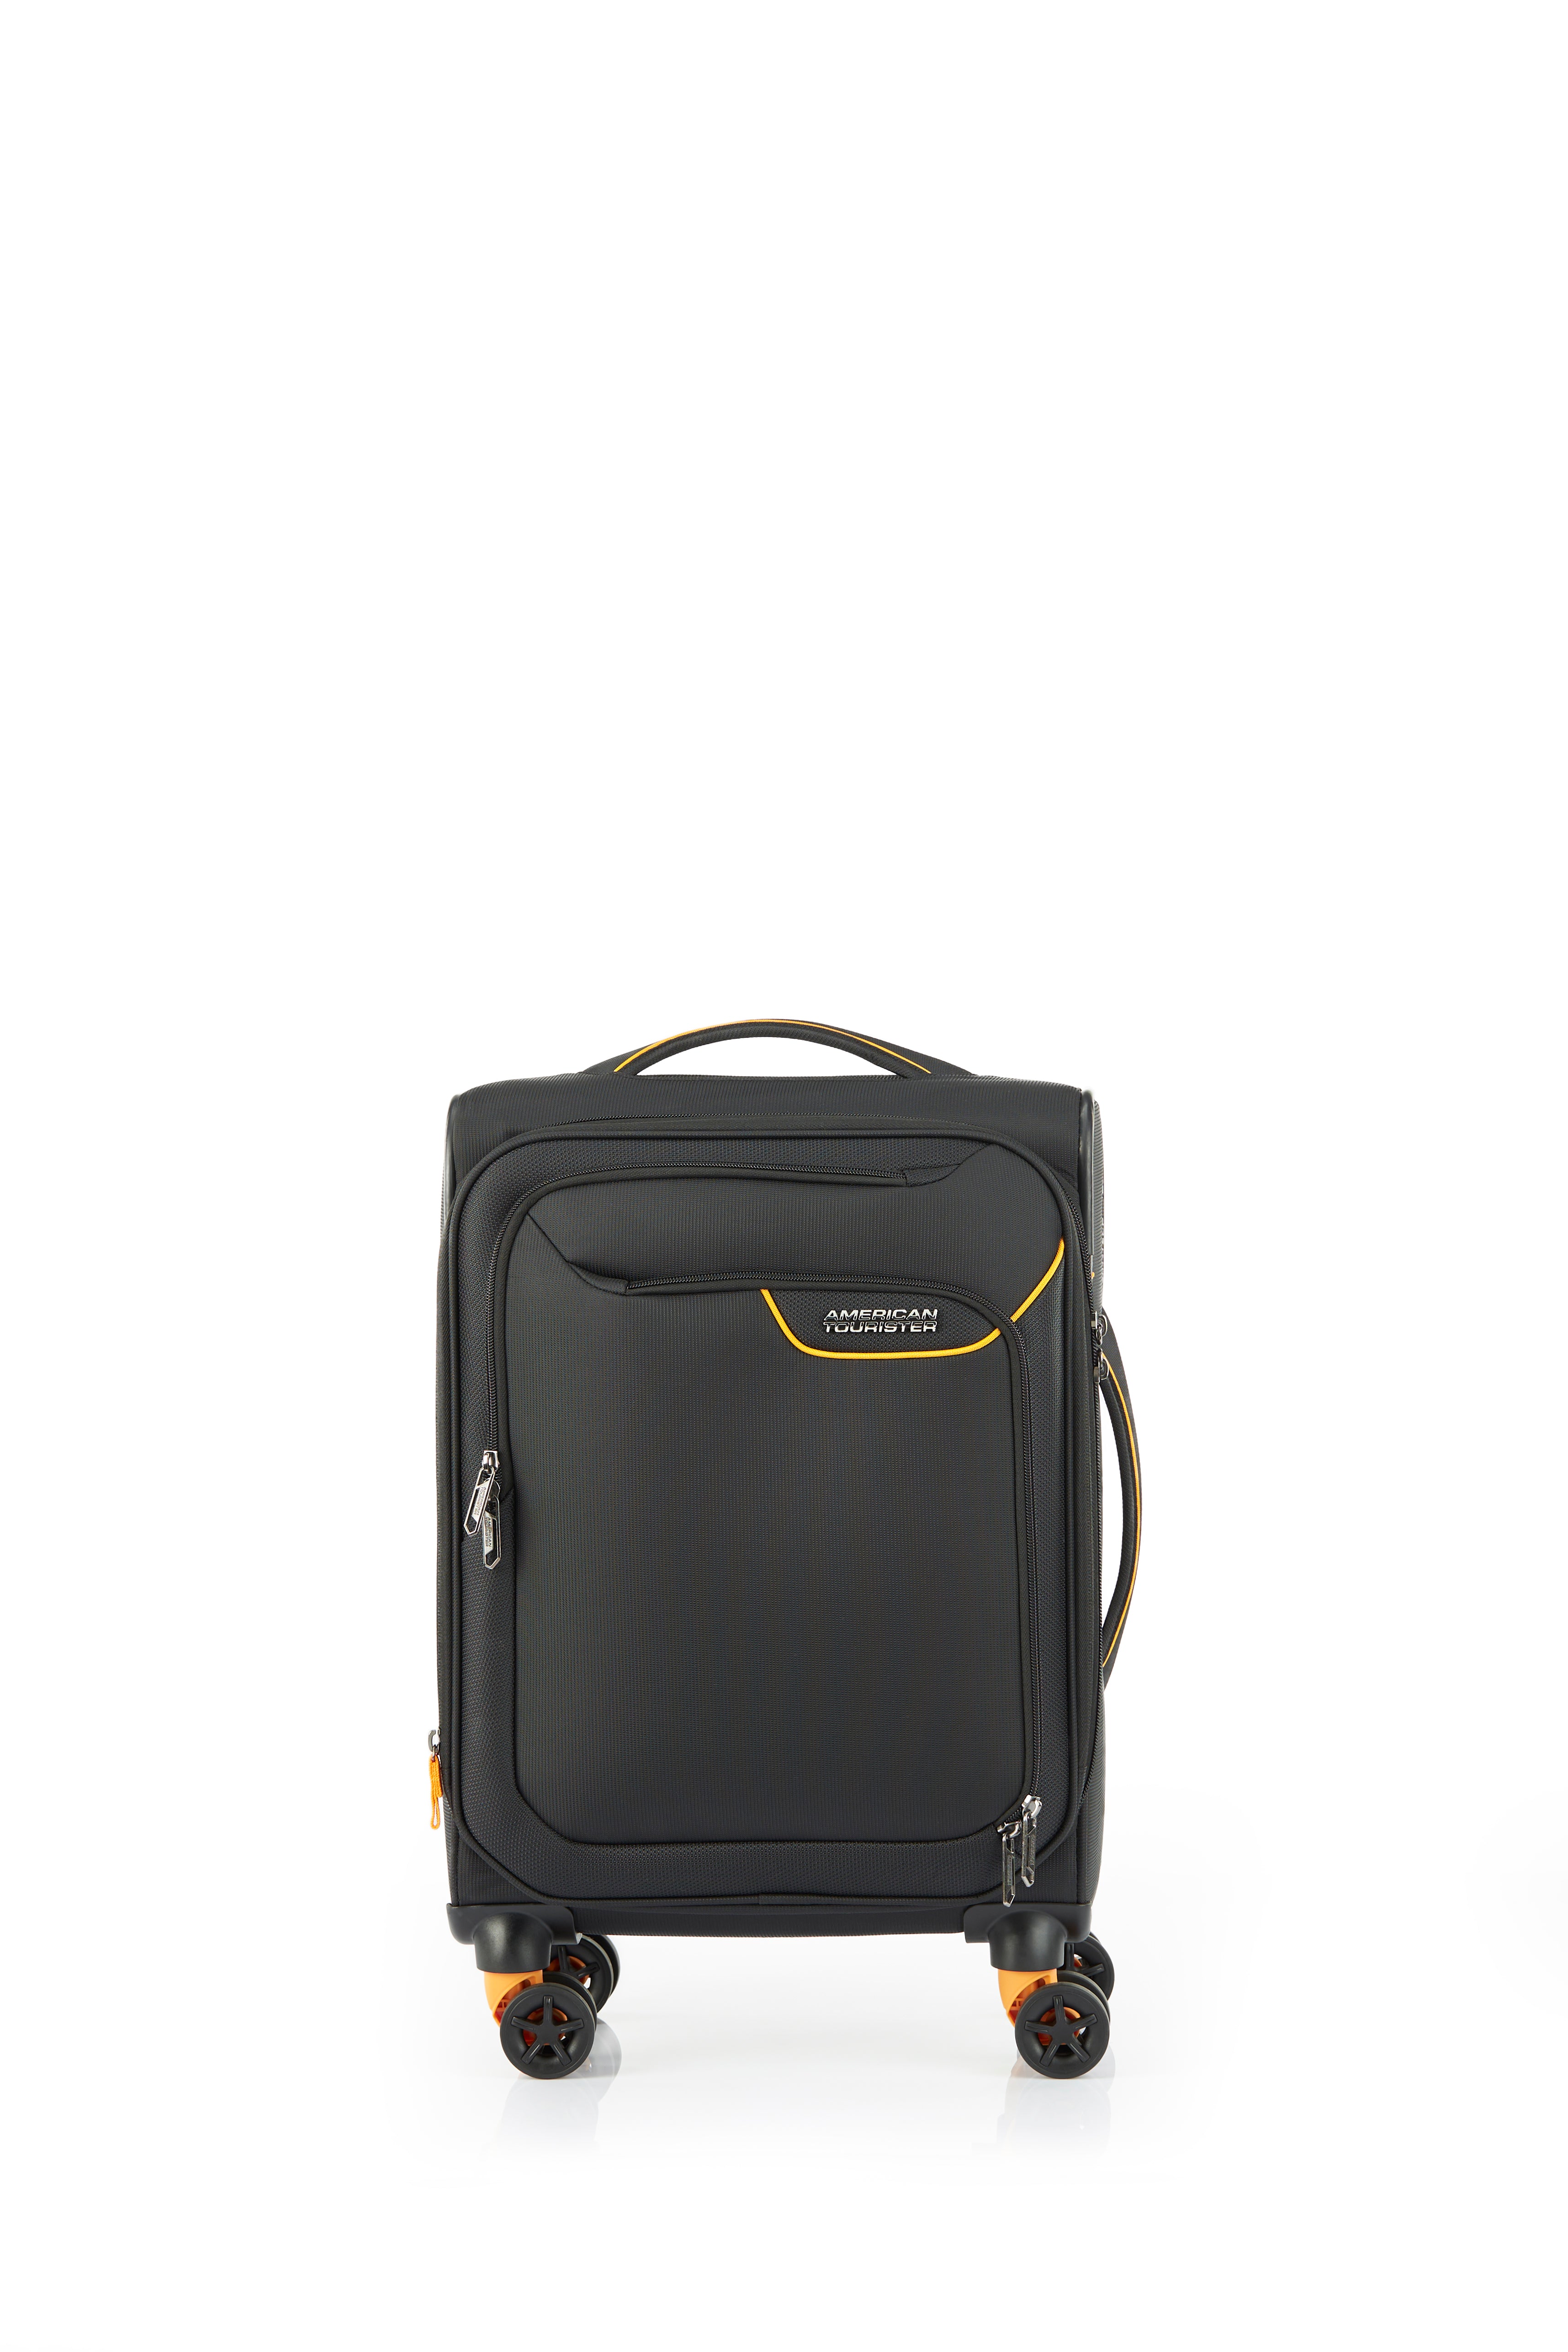 American Tourister - Applite ECO 55cm Small Suitcase - Black/Must - 0